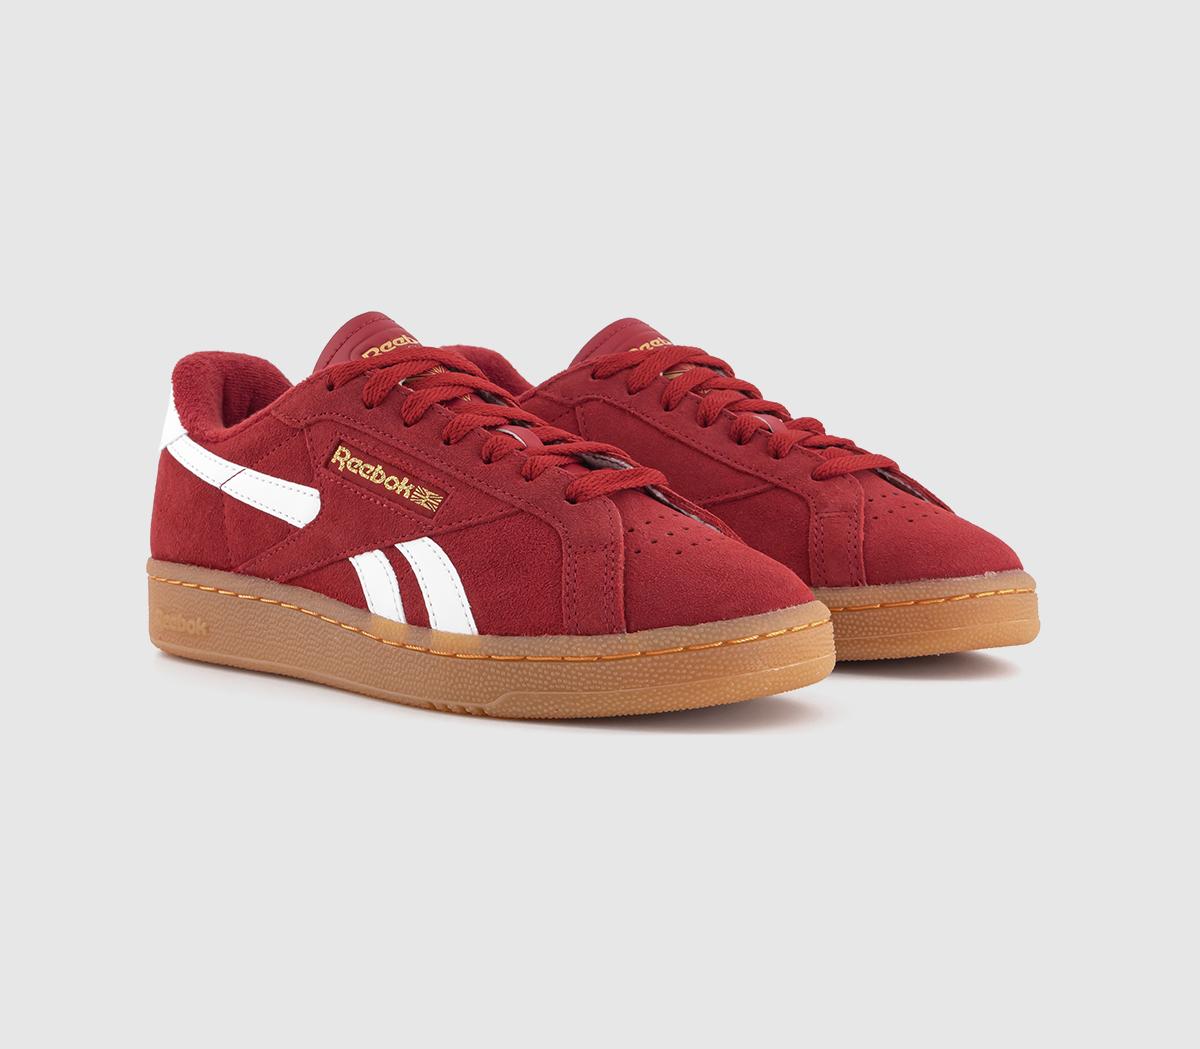 Reebok Womens Club C Grounds Trainers Flash Red Gum, 5.5